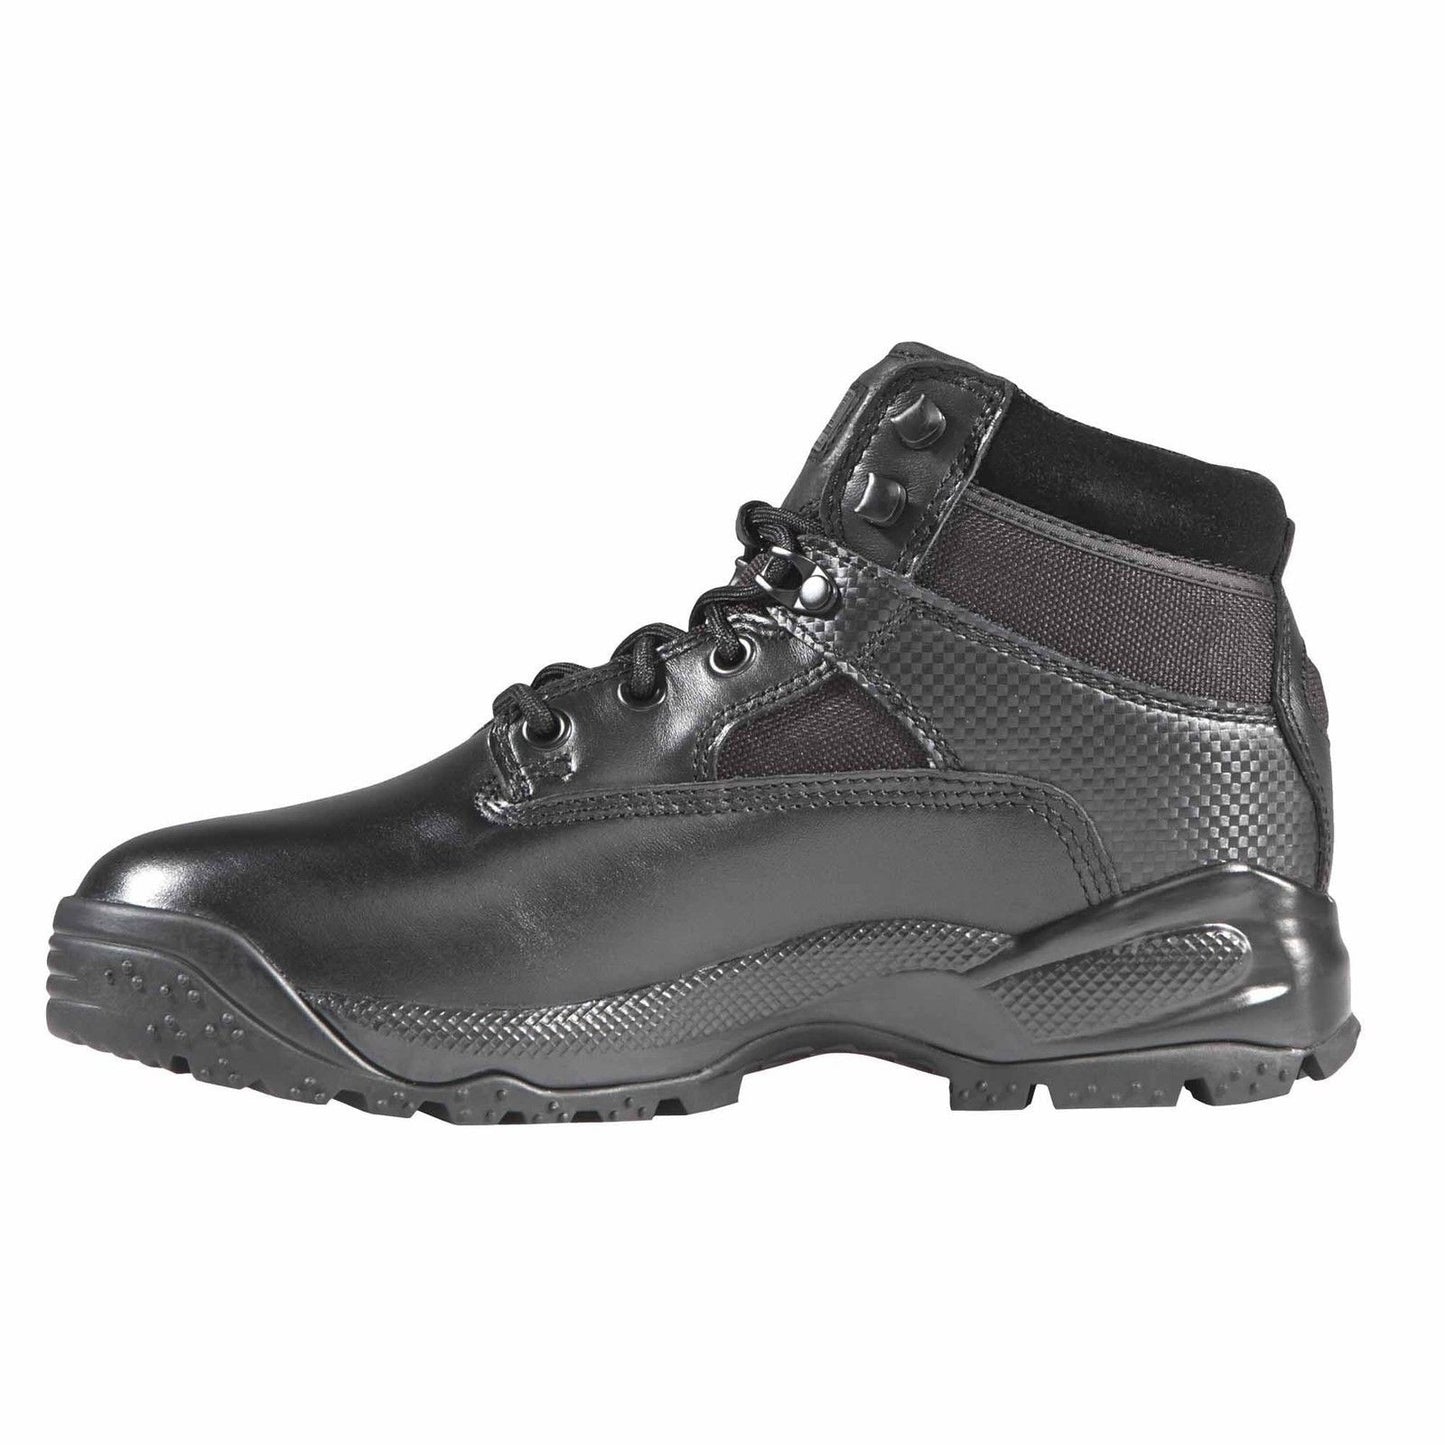 5.11 Tactical Mens Black ATAC 6" & Police Field Duty Work Boots